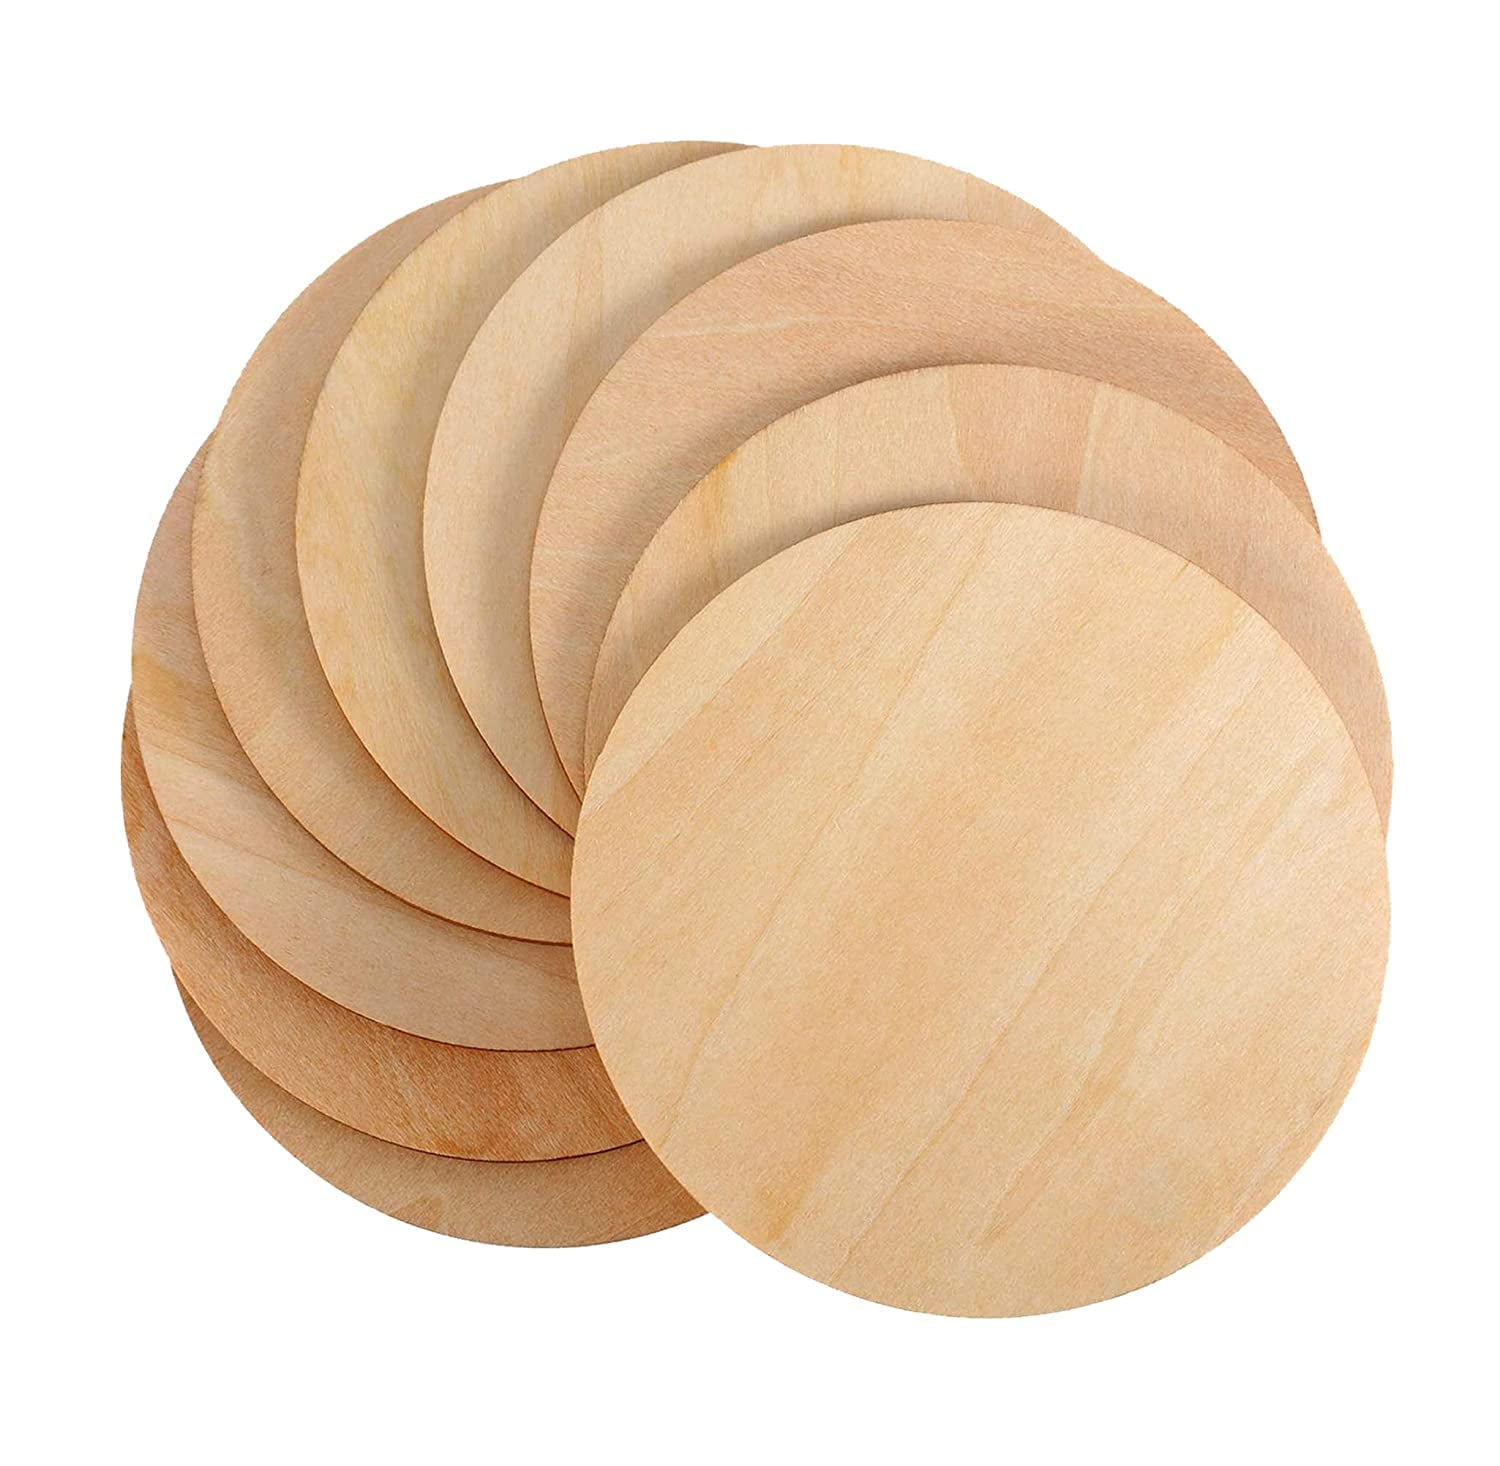 yangbaga 36Pcs Unfinished Wood Coasters-4 Unfinished Natural Wood Slices  for Crafts Round with Non-Slip for Wedding Decoration/Blank Coa